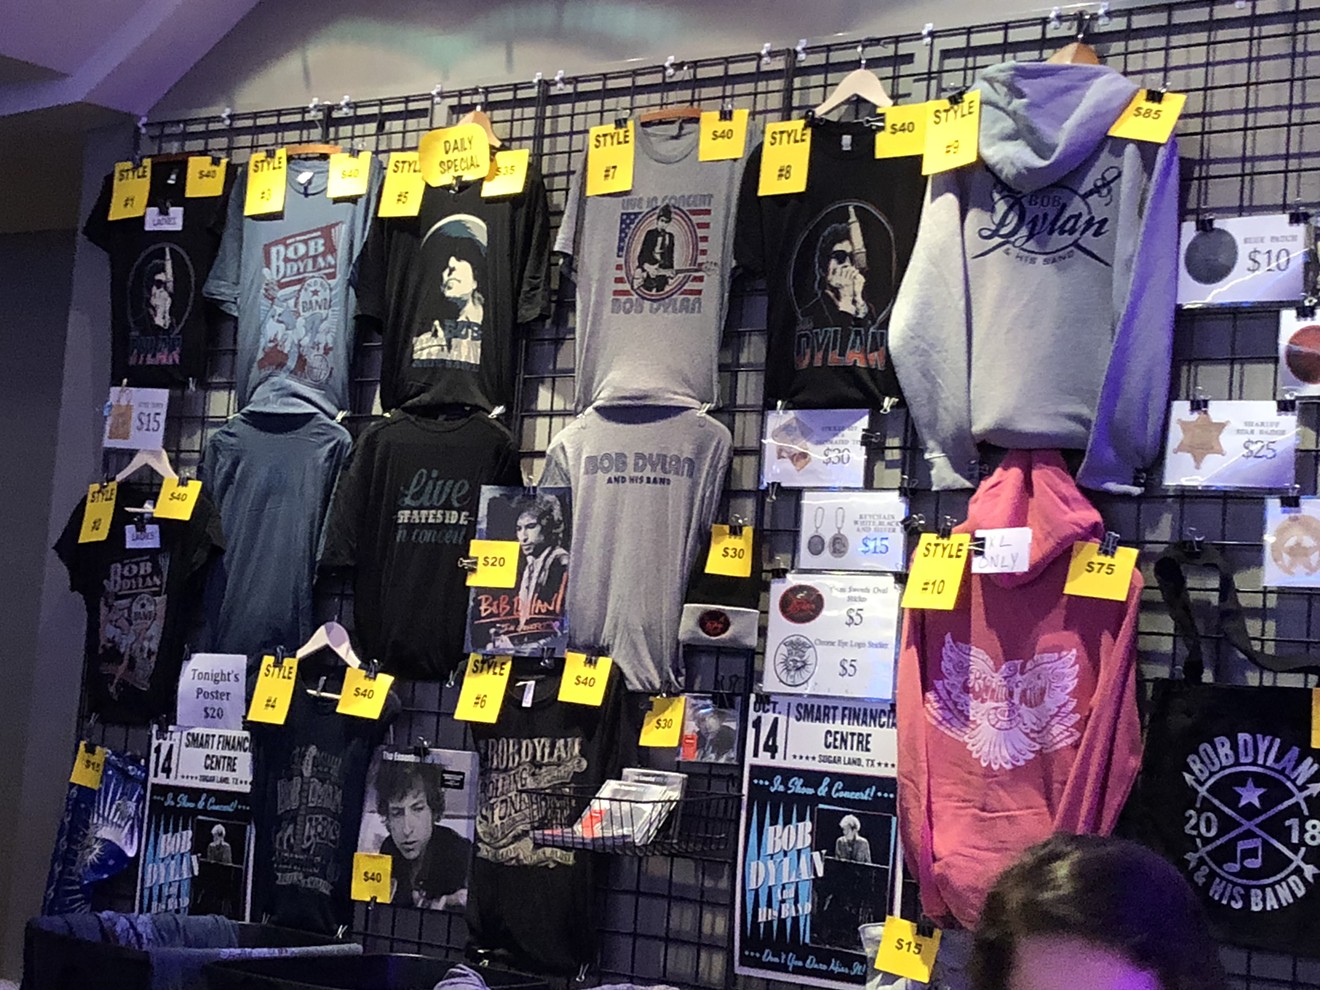 Bob Dylan's management does not allow press or public photography during his shows. So here's a bunch of T-shirts that were for sale in the lobby!